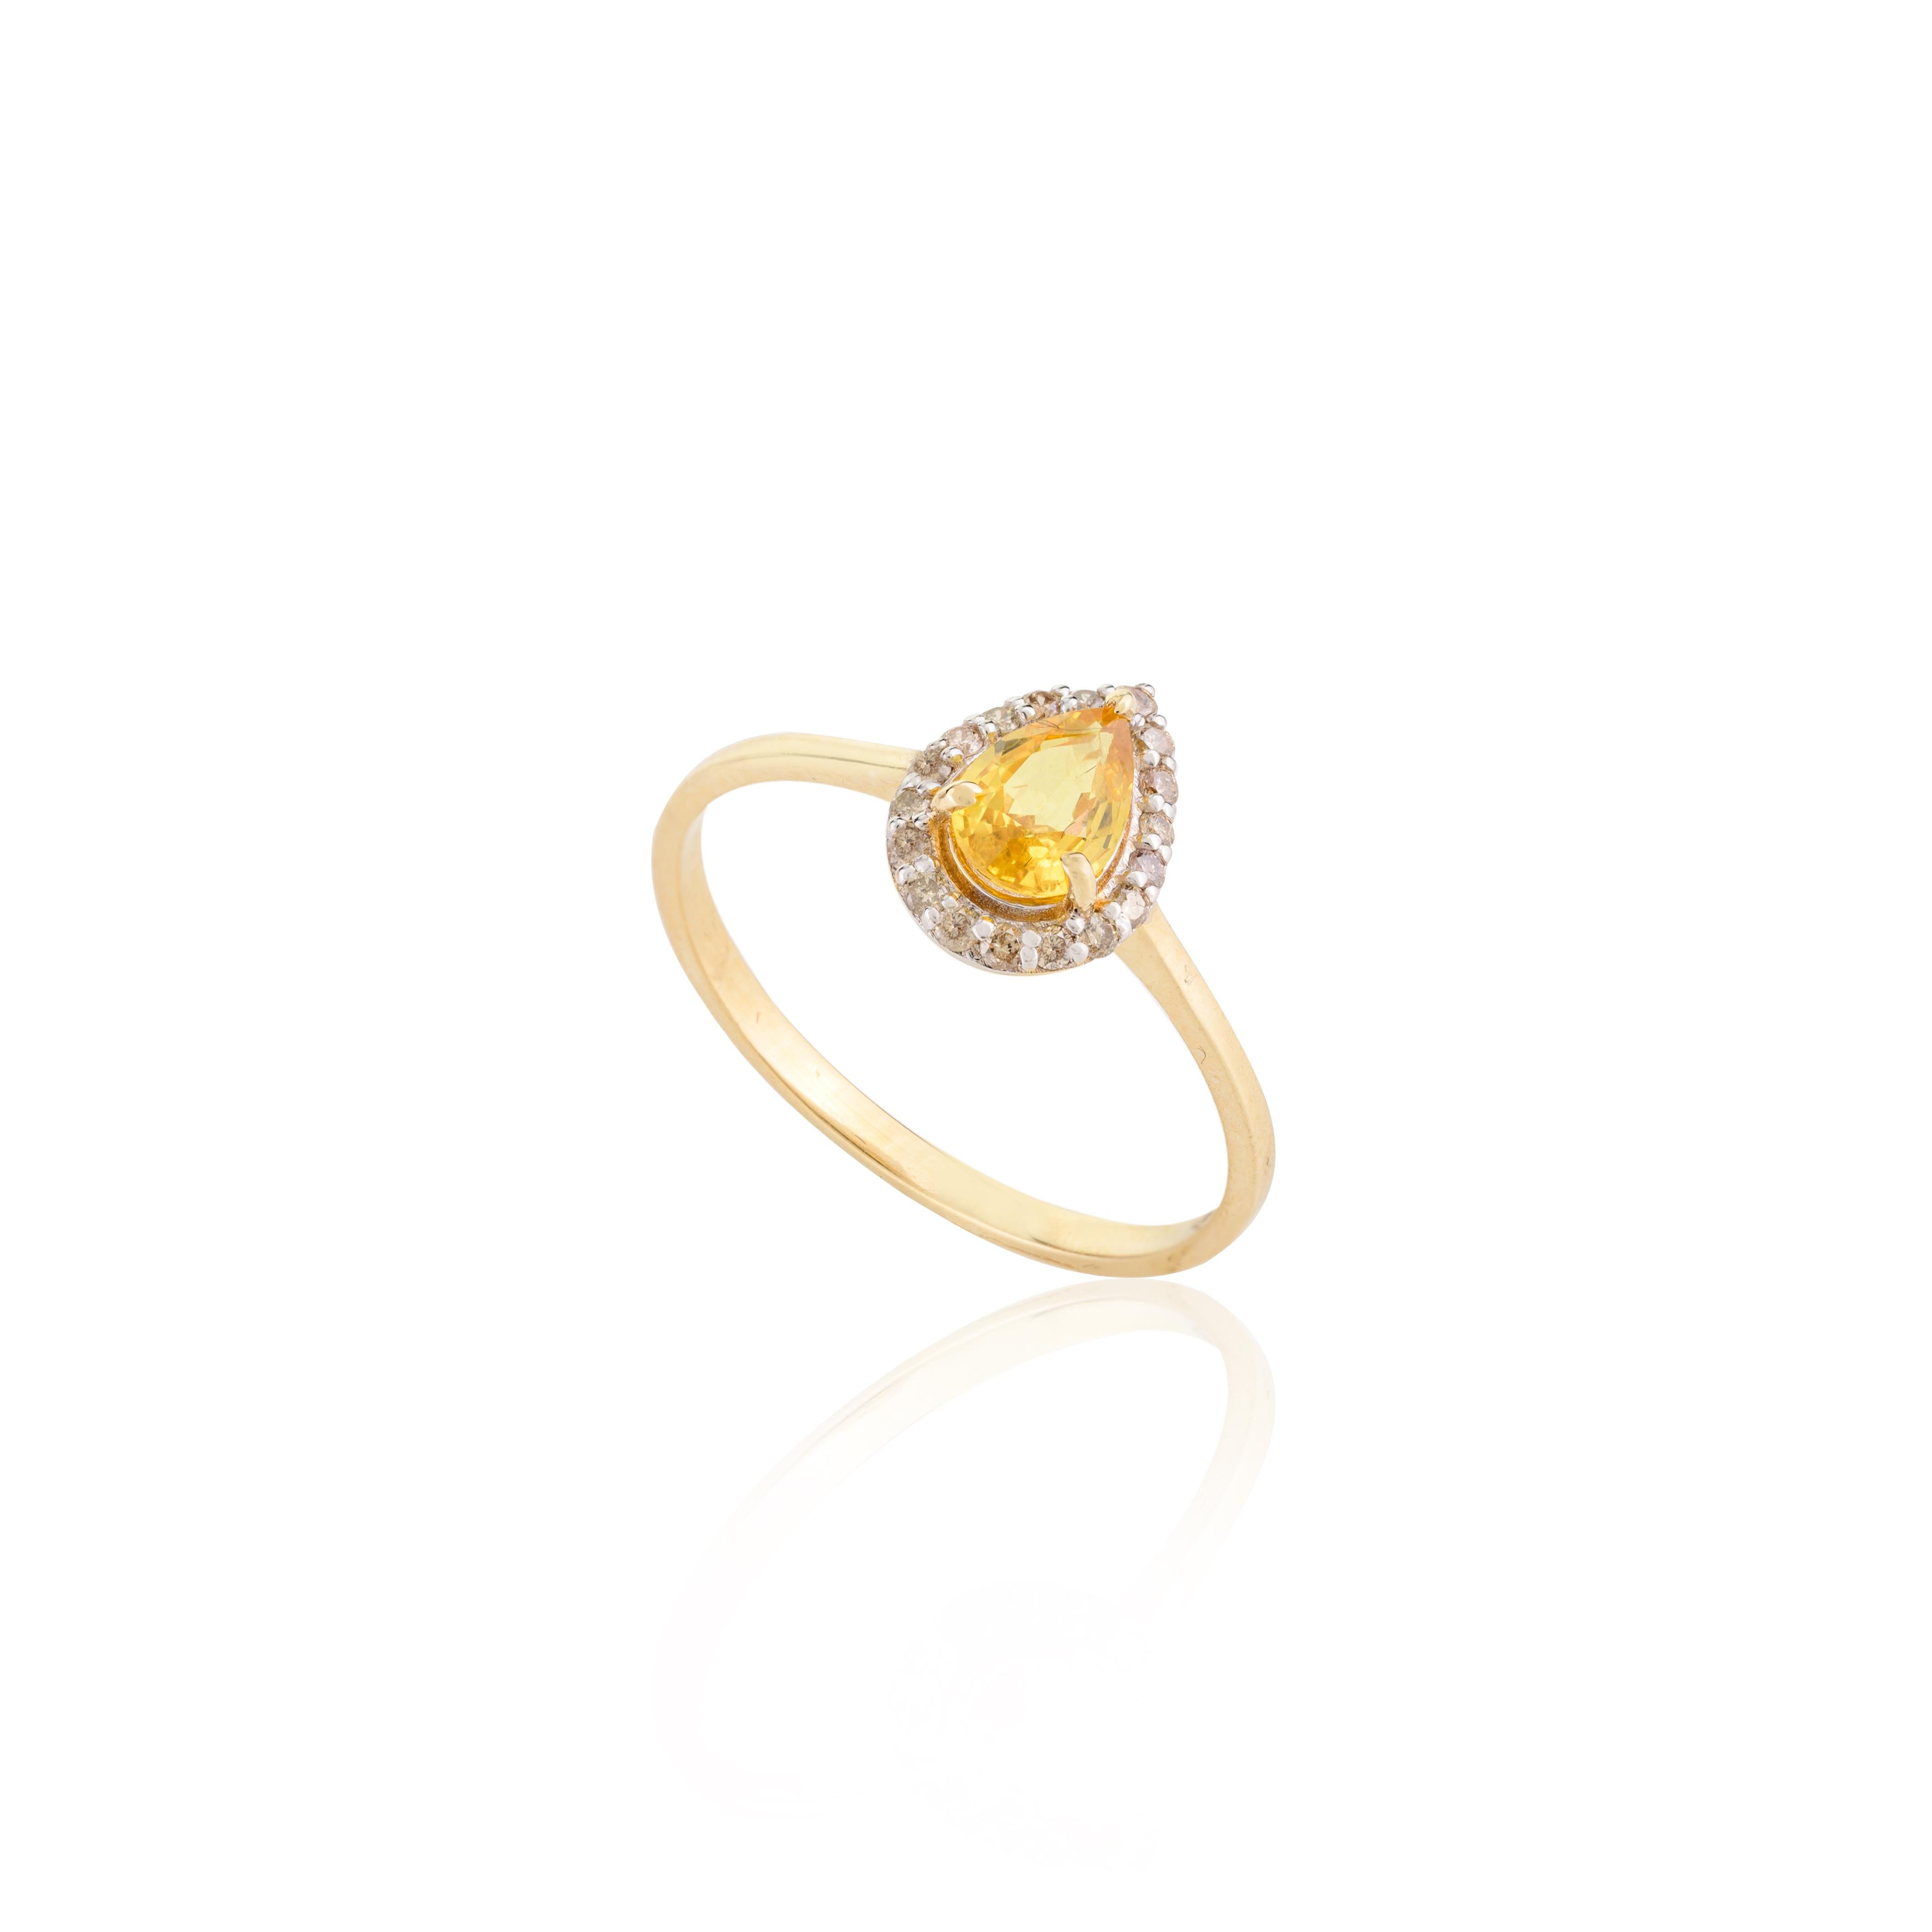 For Sale:  Real Yellow Sapphire Ring, Earrings and Pendant Jewelry Set in 18k Yellow Gold 8